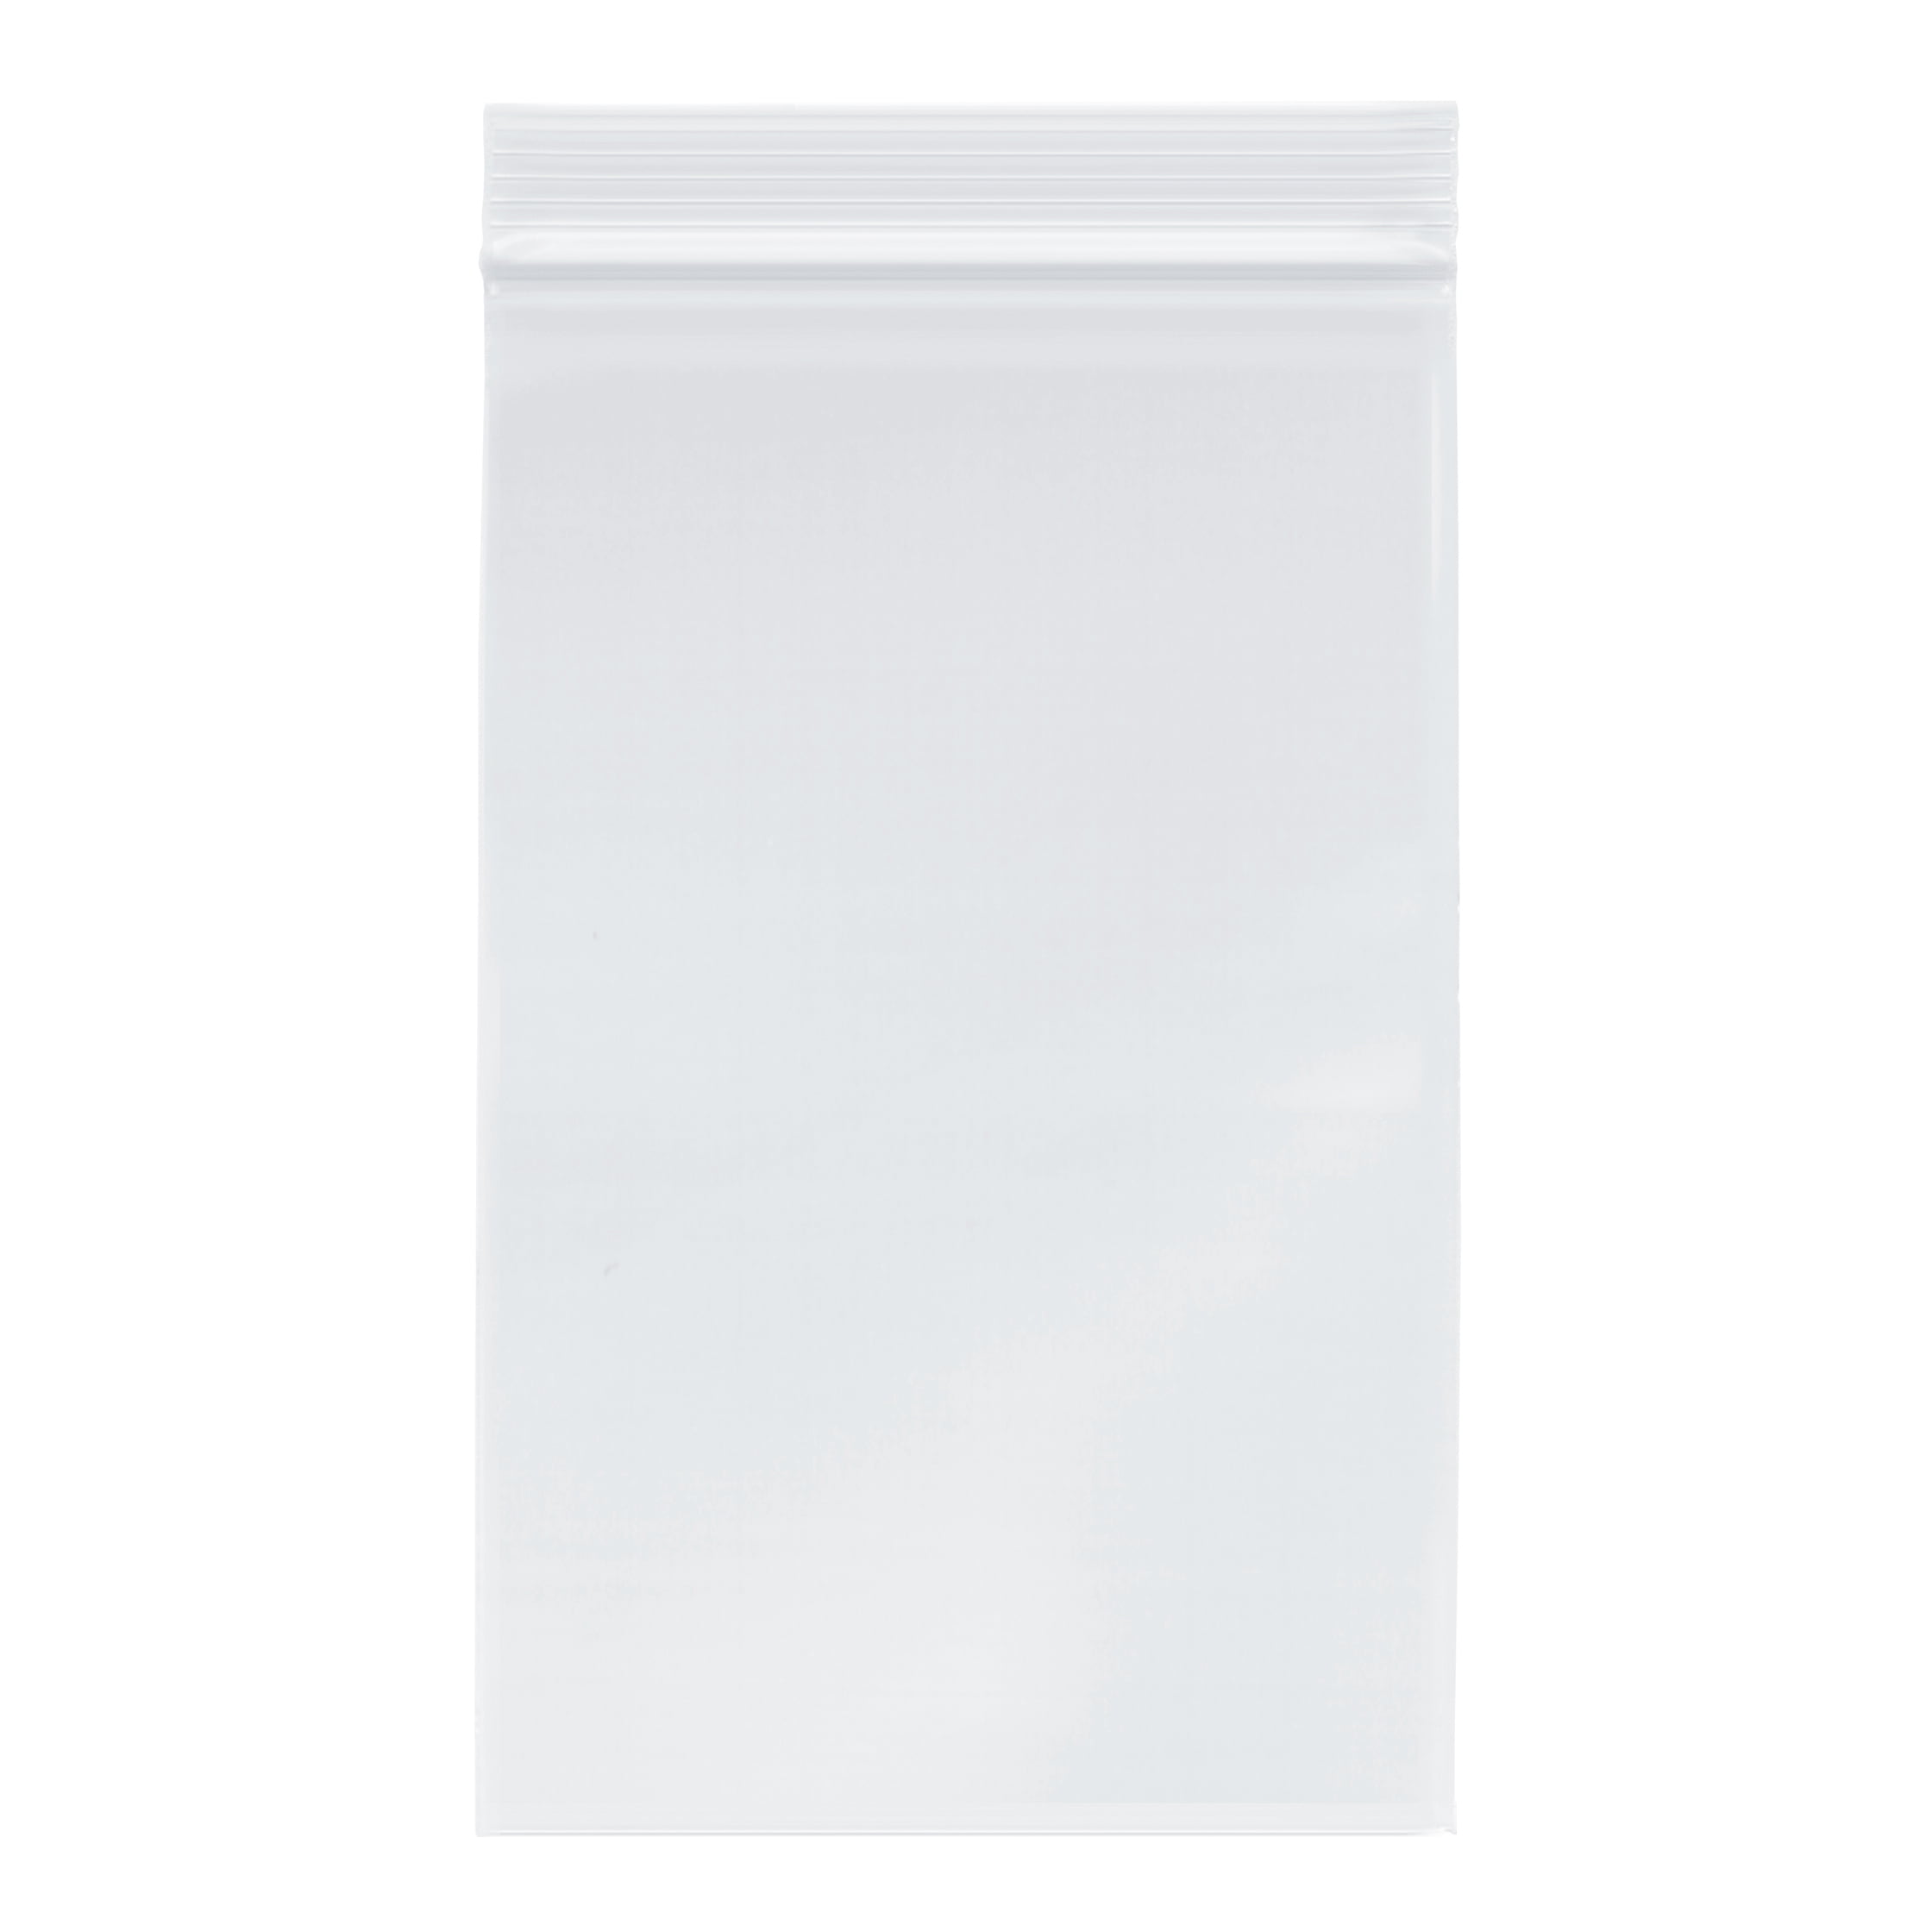 - 2 Mil Thick by Amamax 100 CLEAR Reclosable Zipper Bag 5 x 8